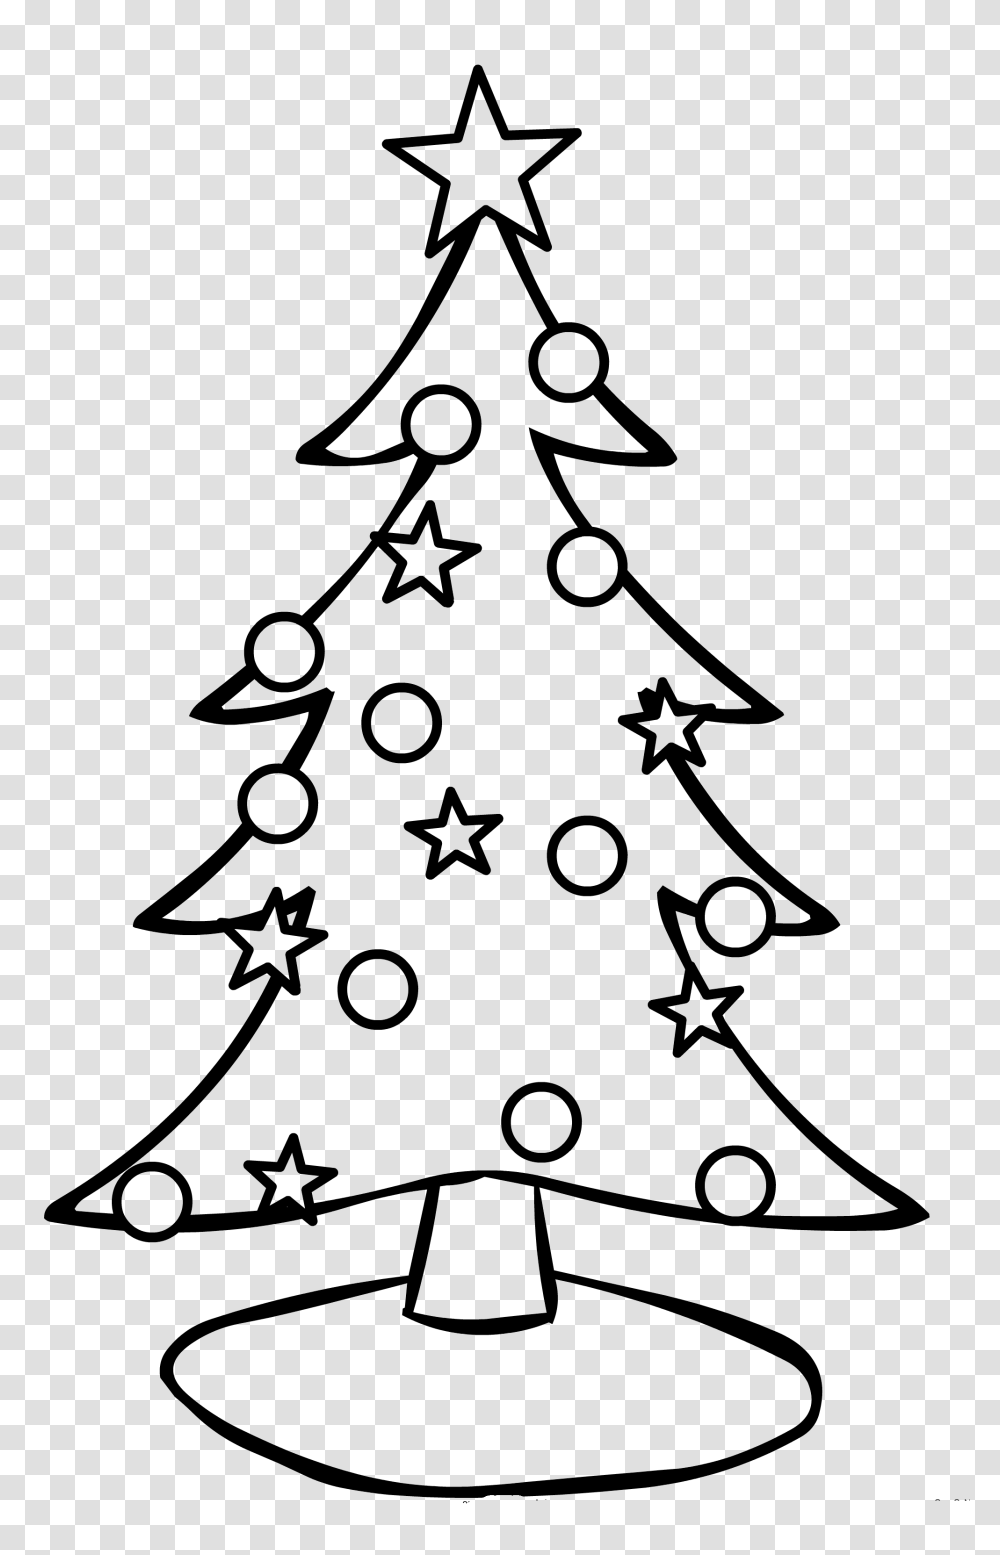 Simple Christmas Tree Coloring Pages Christmas, Plant, Ornament, Star Symbol Transparent Png